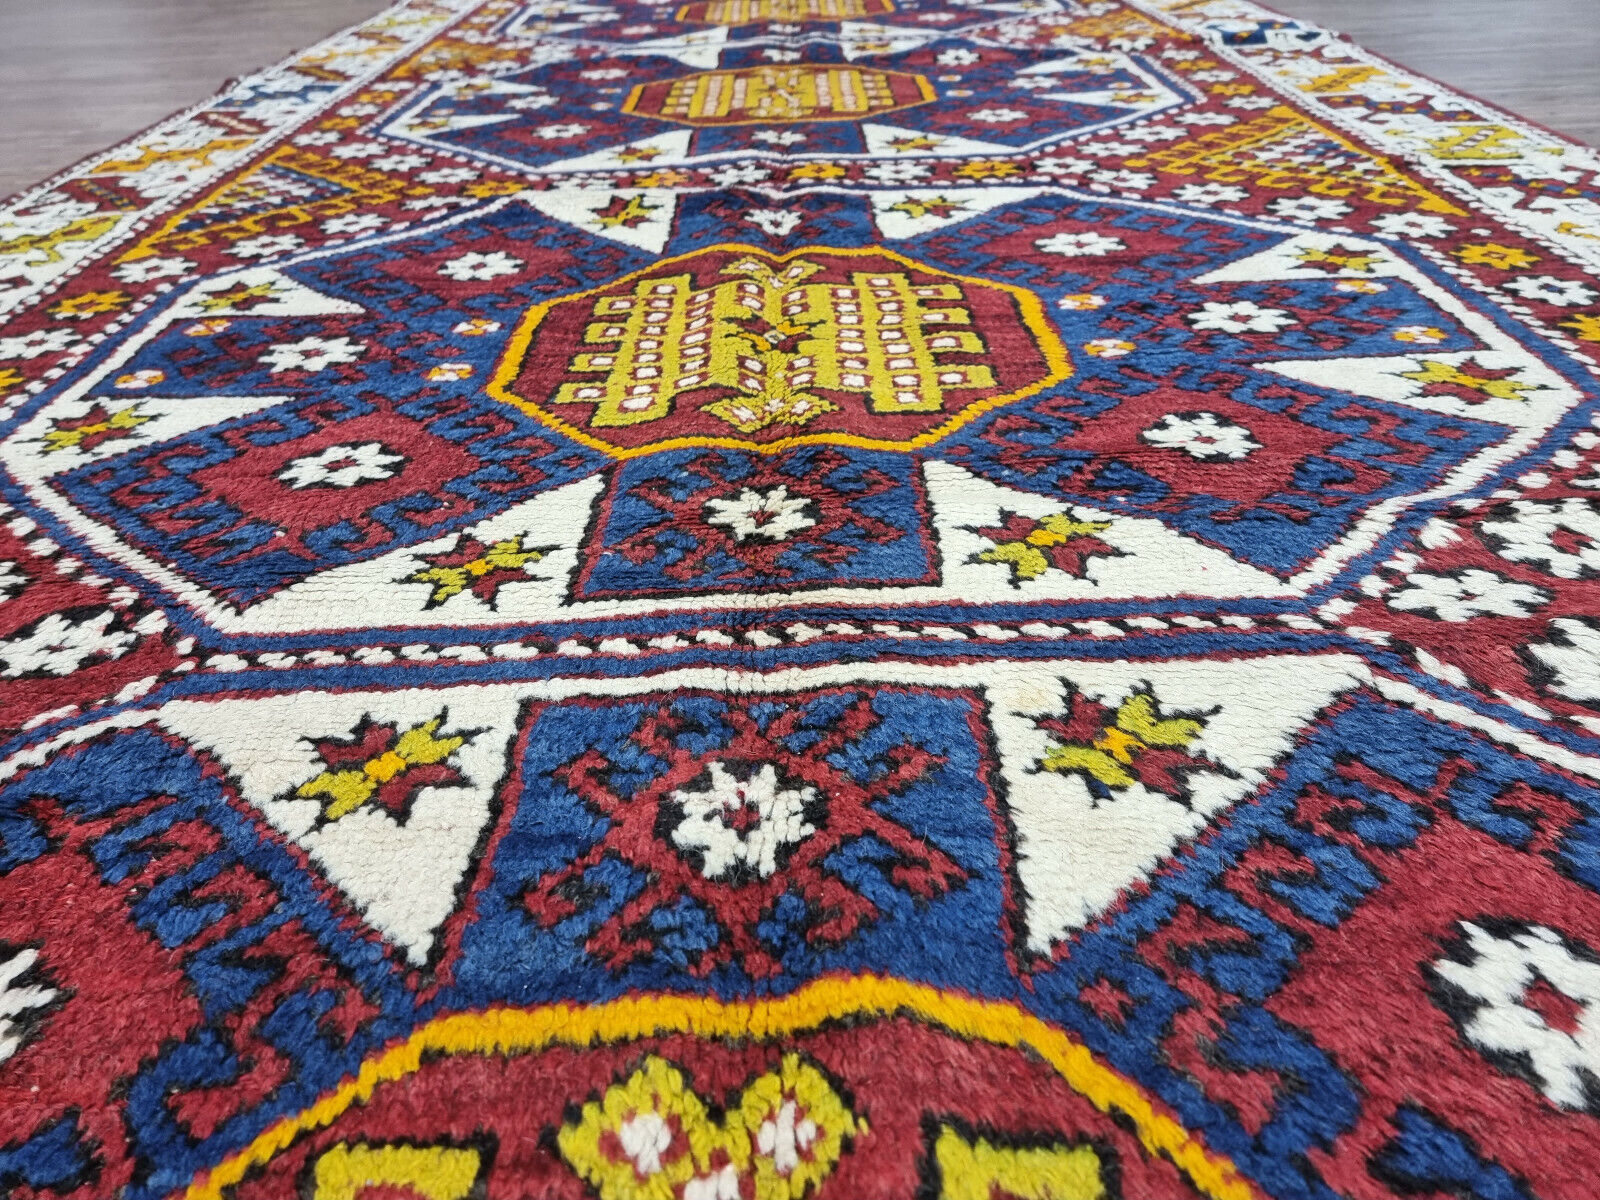 Close-up of the three prominent medallions on the Handmade Antique Turkish Anatolian Runner Rug